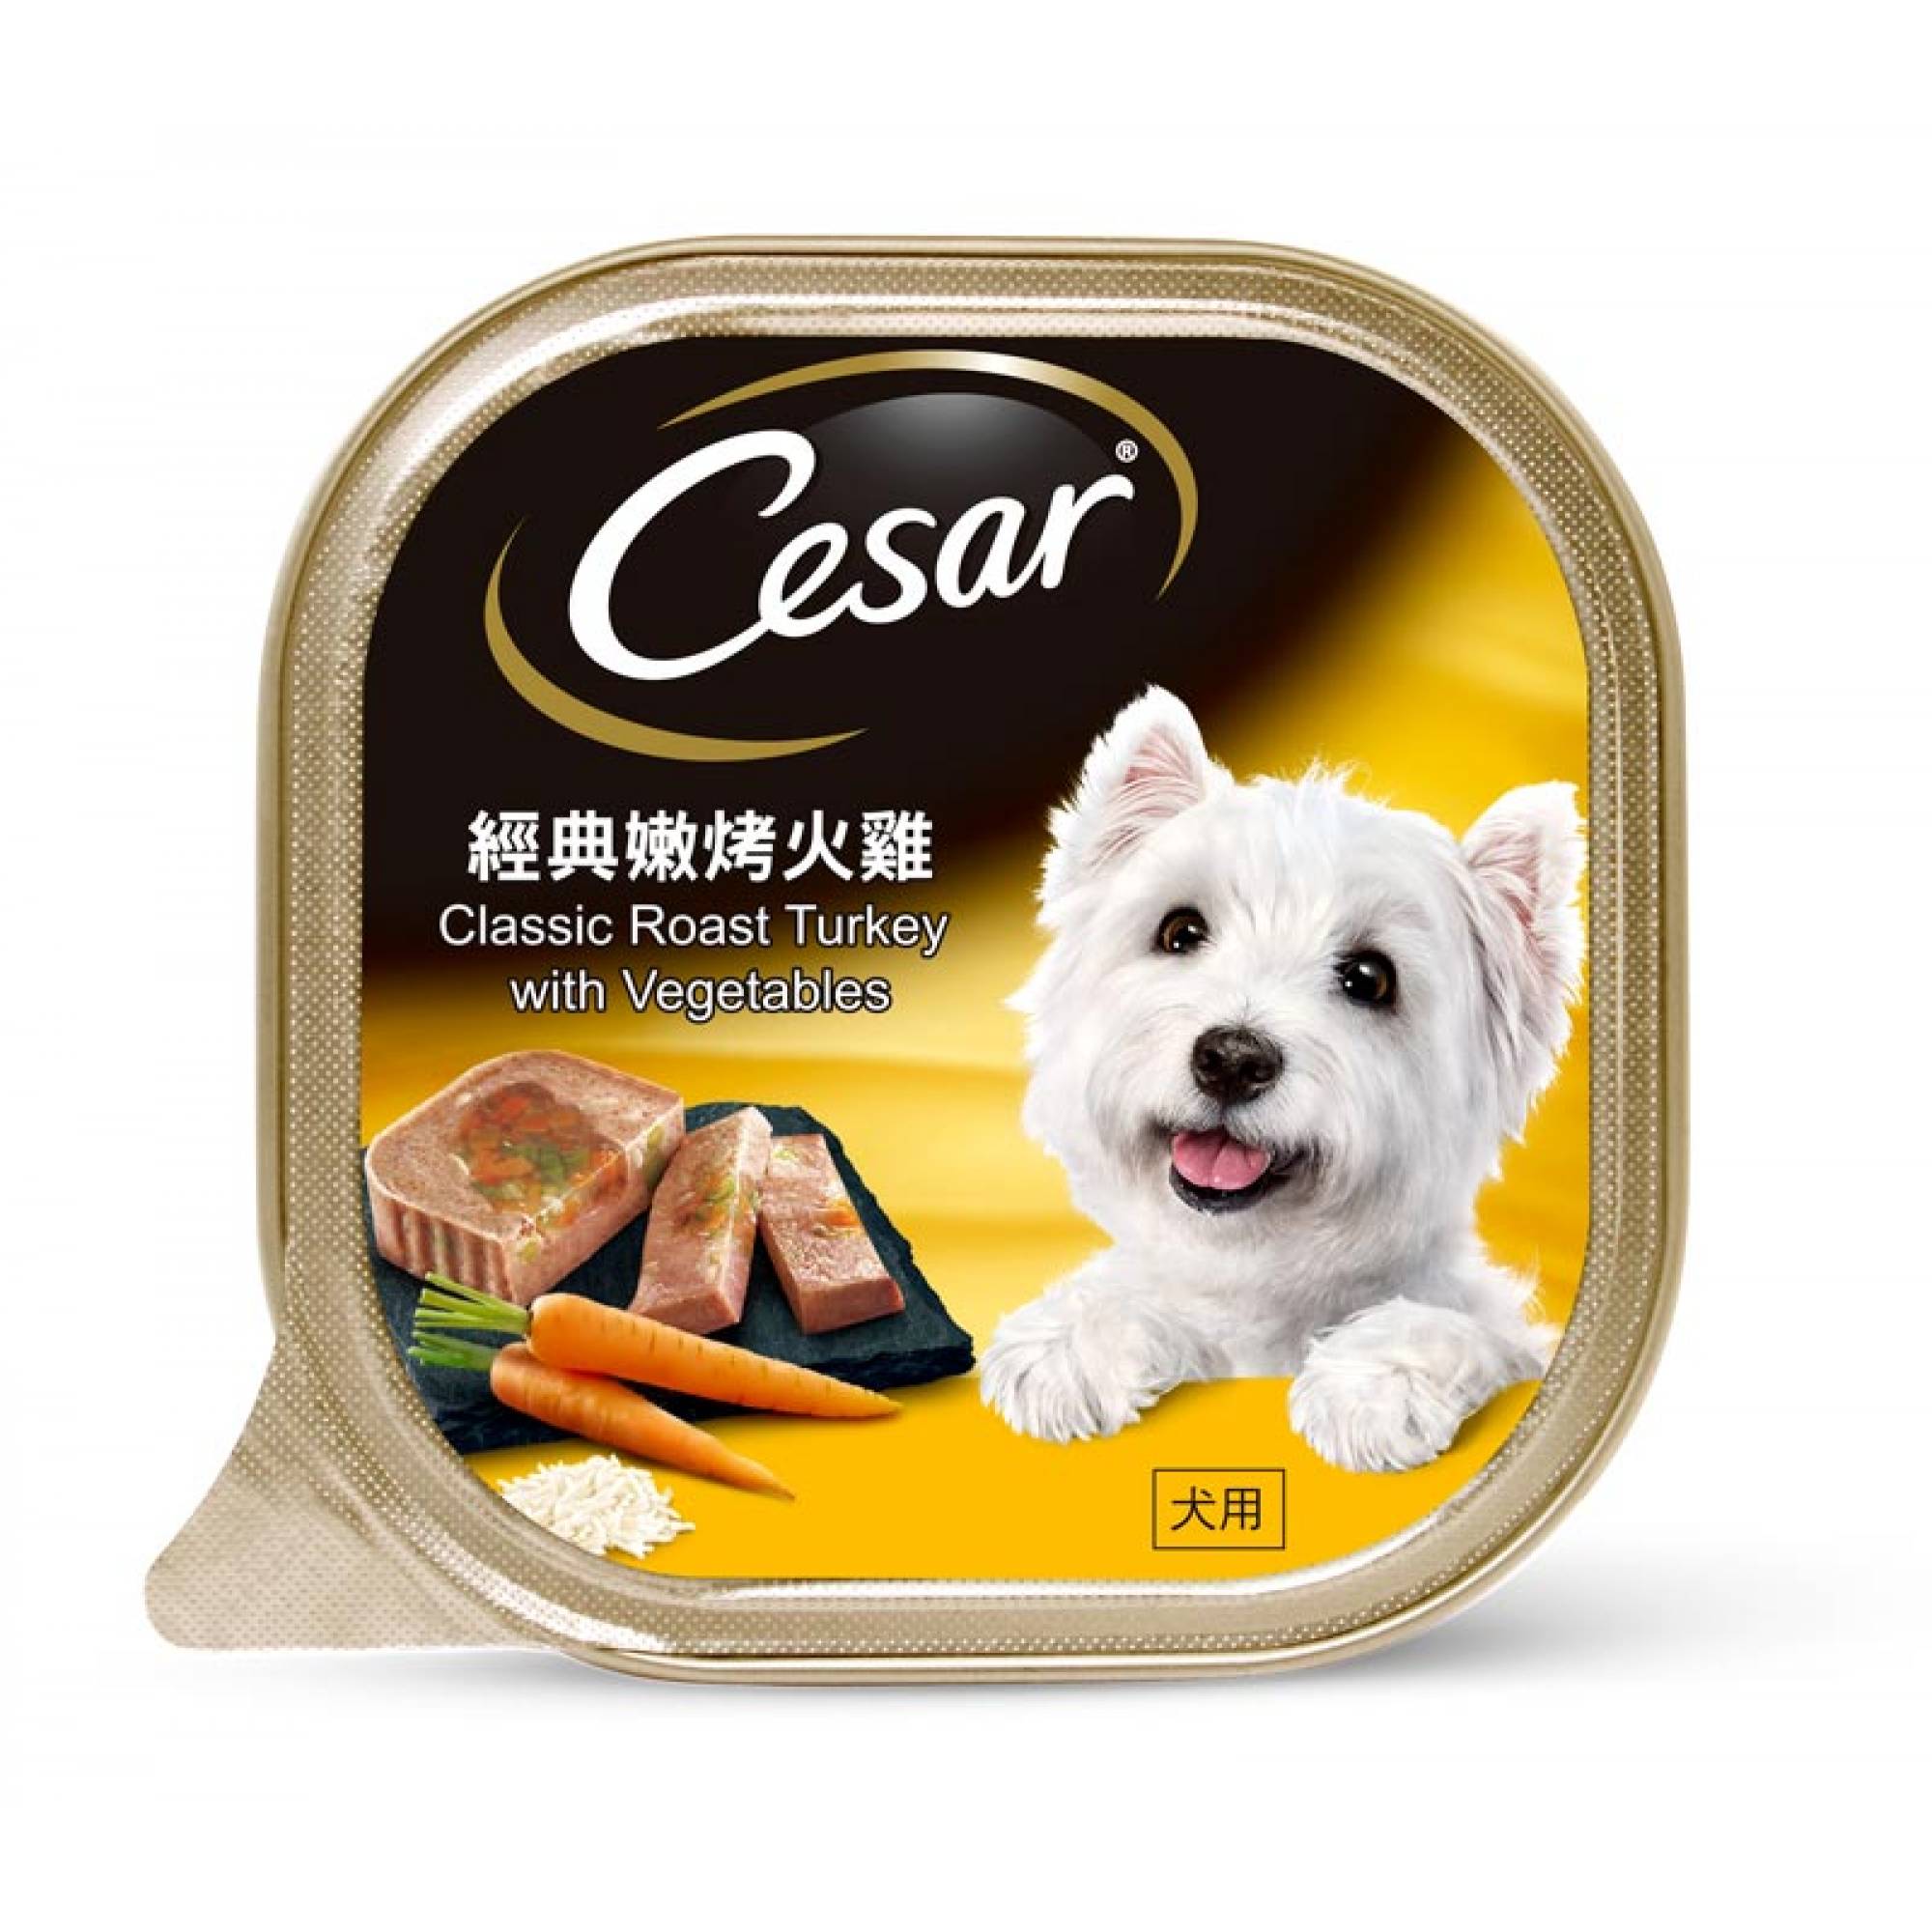 Cesar - Classic Roast Turkey with Vegetables Pate Dog Food 100g